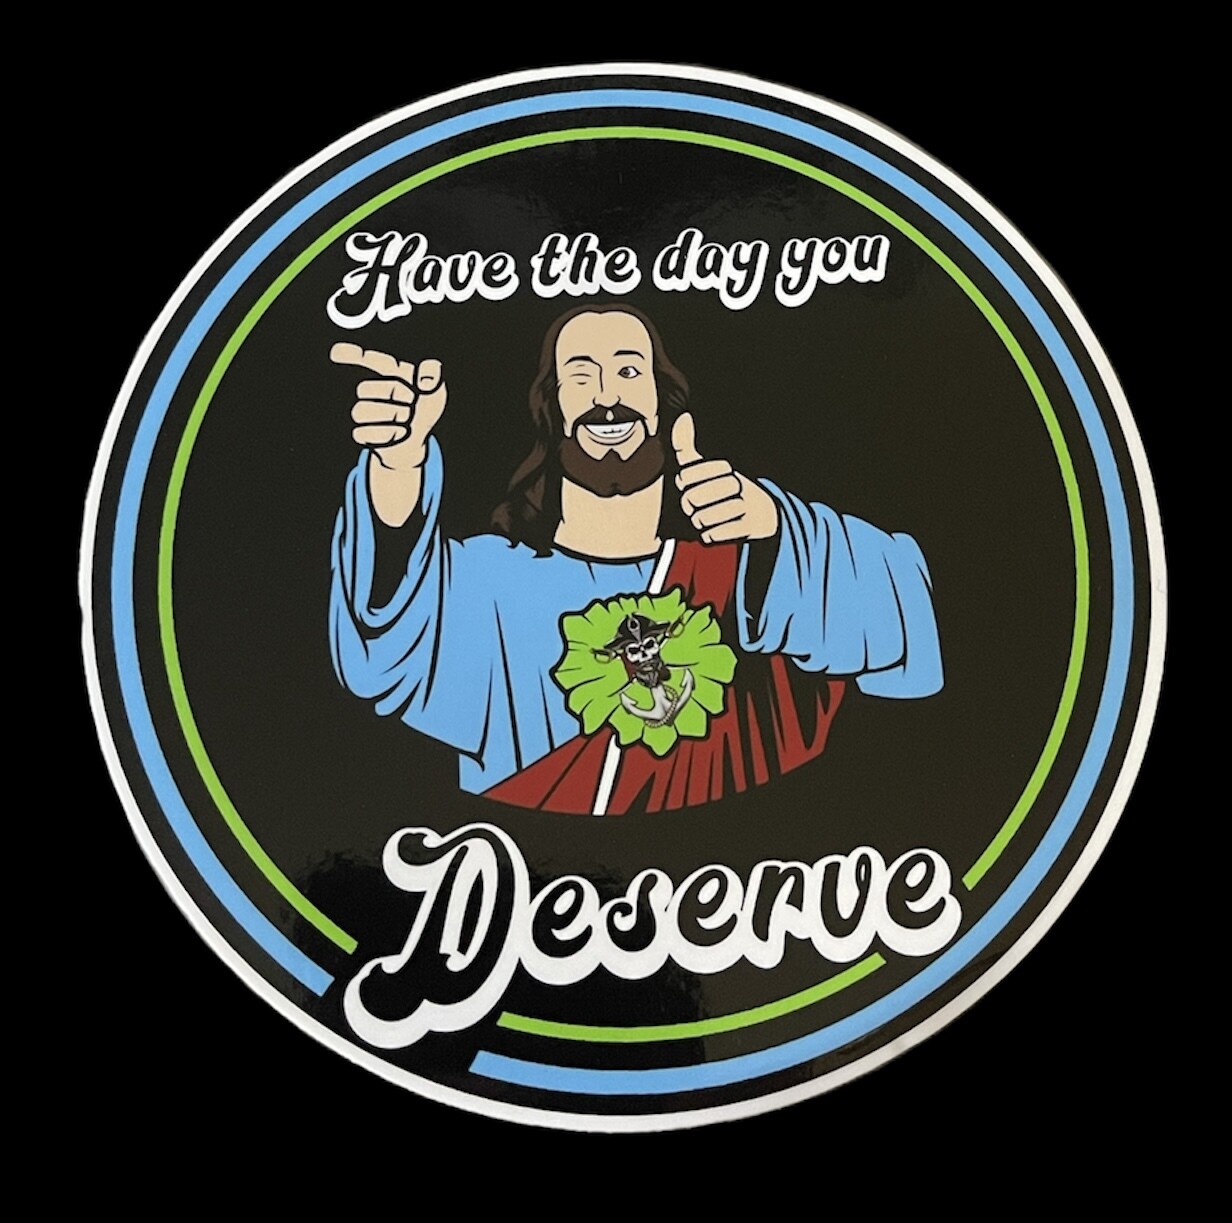 Have the day you deserve sticker